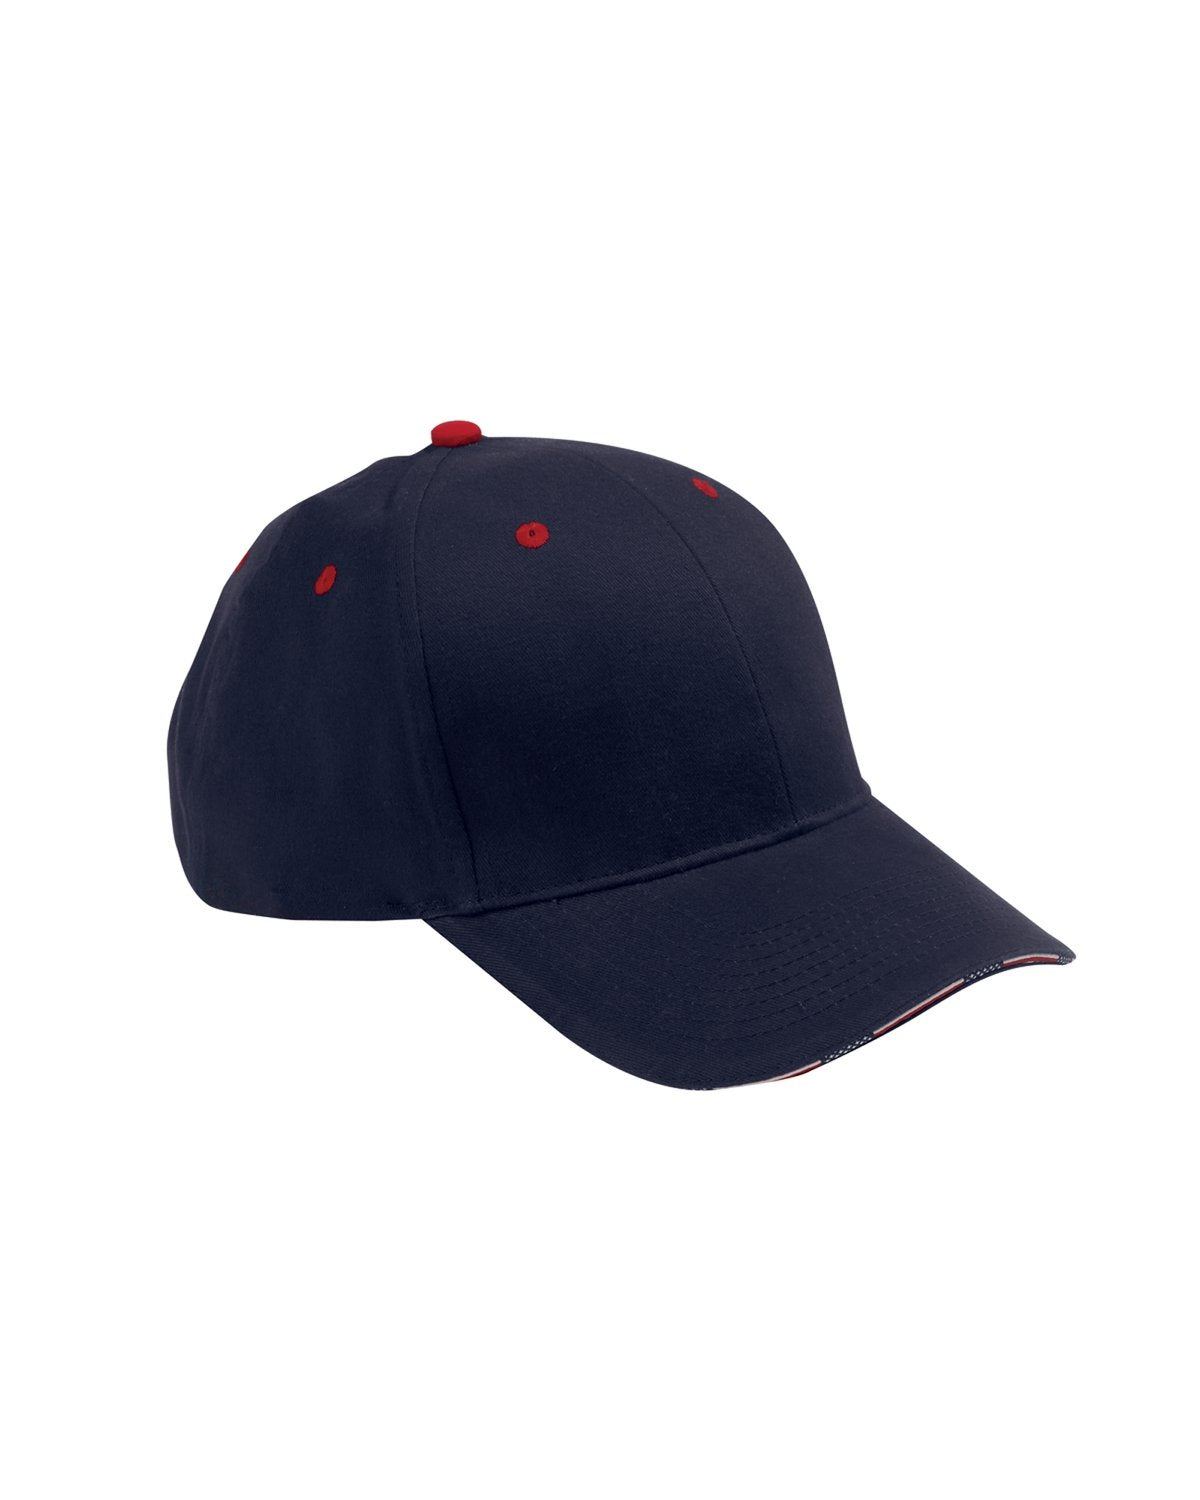 PA102-AD-54-NAVY_RED-OS